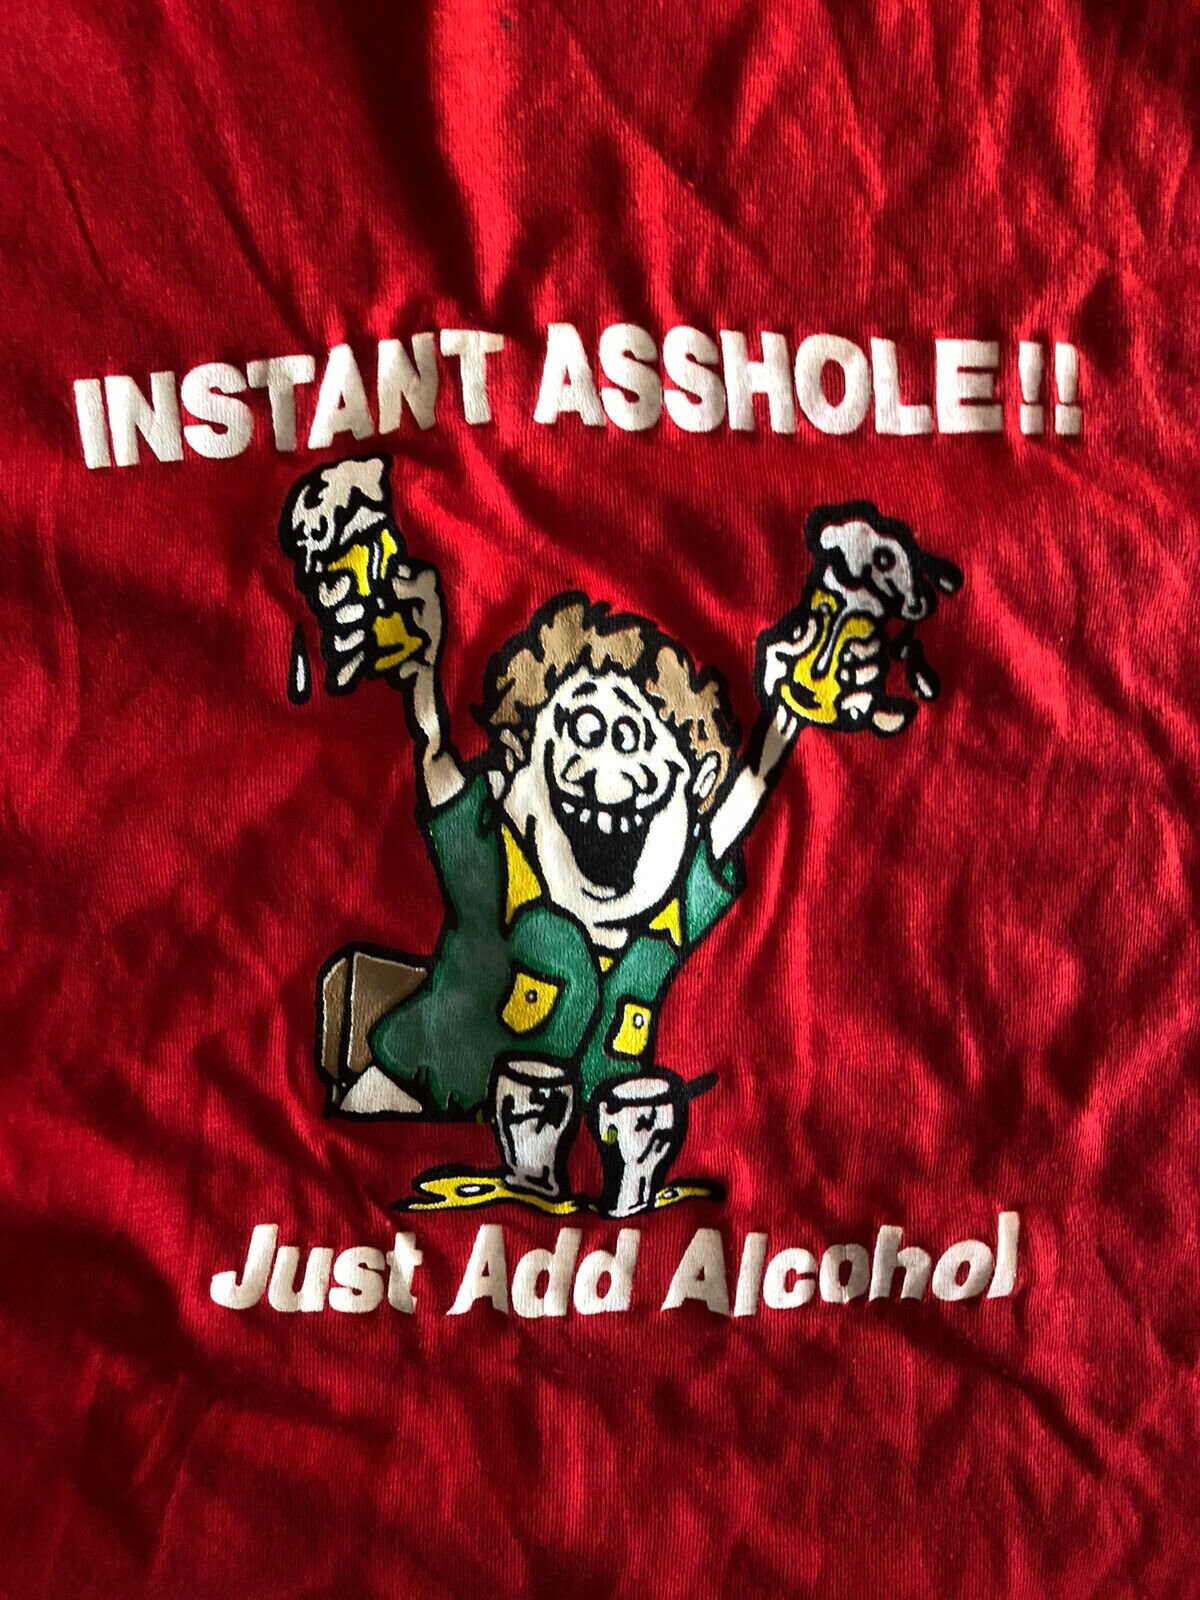 Vintage Instant Asshole Just Add Alcohol Red T Shirt Tee Size Etsy 